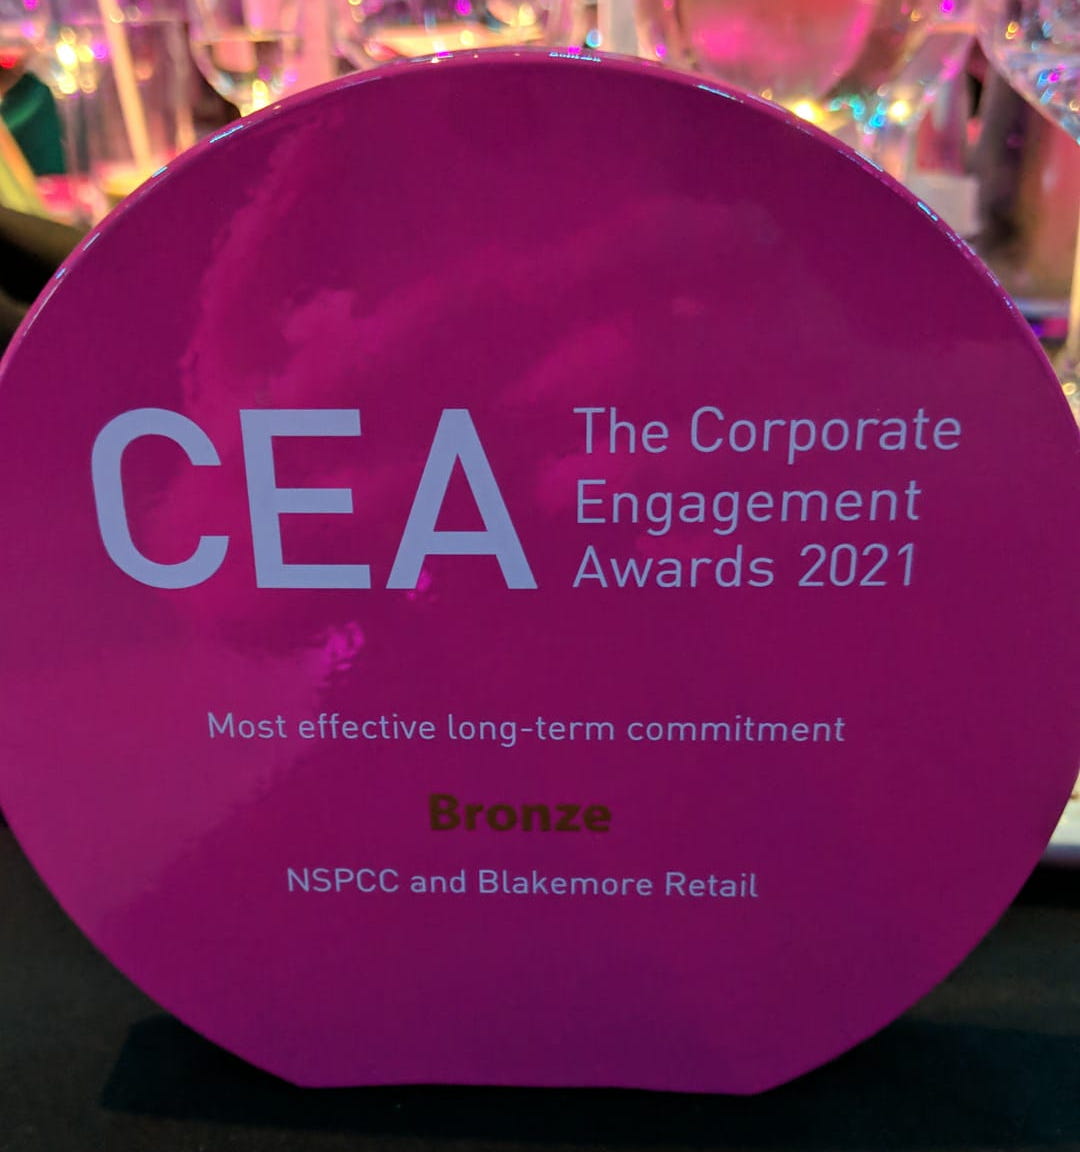 Blakemore Retail and NSPCC win at Corporate Engagement Awards